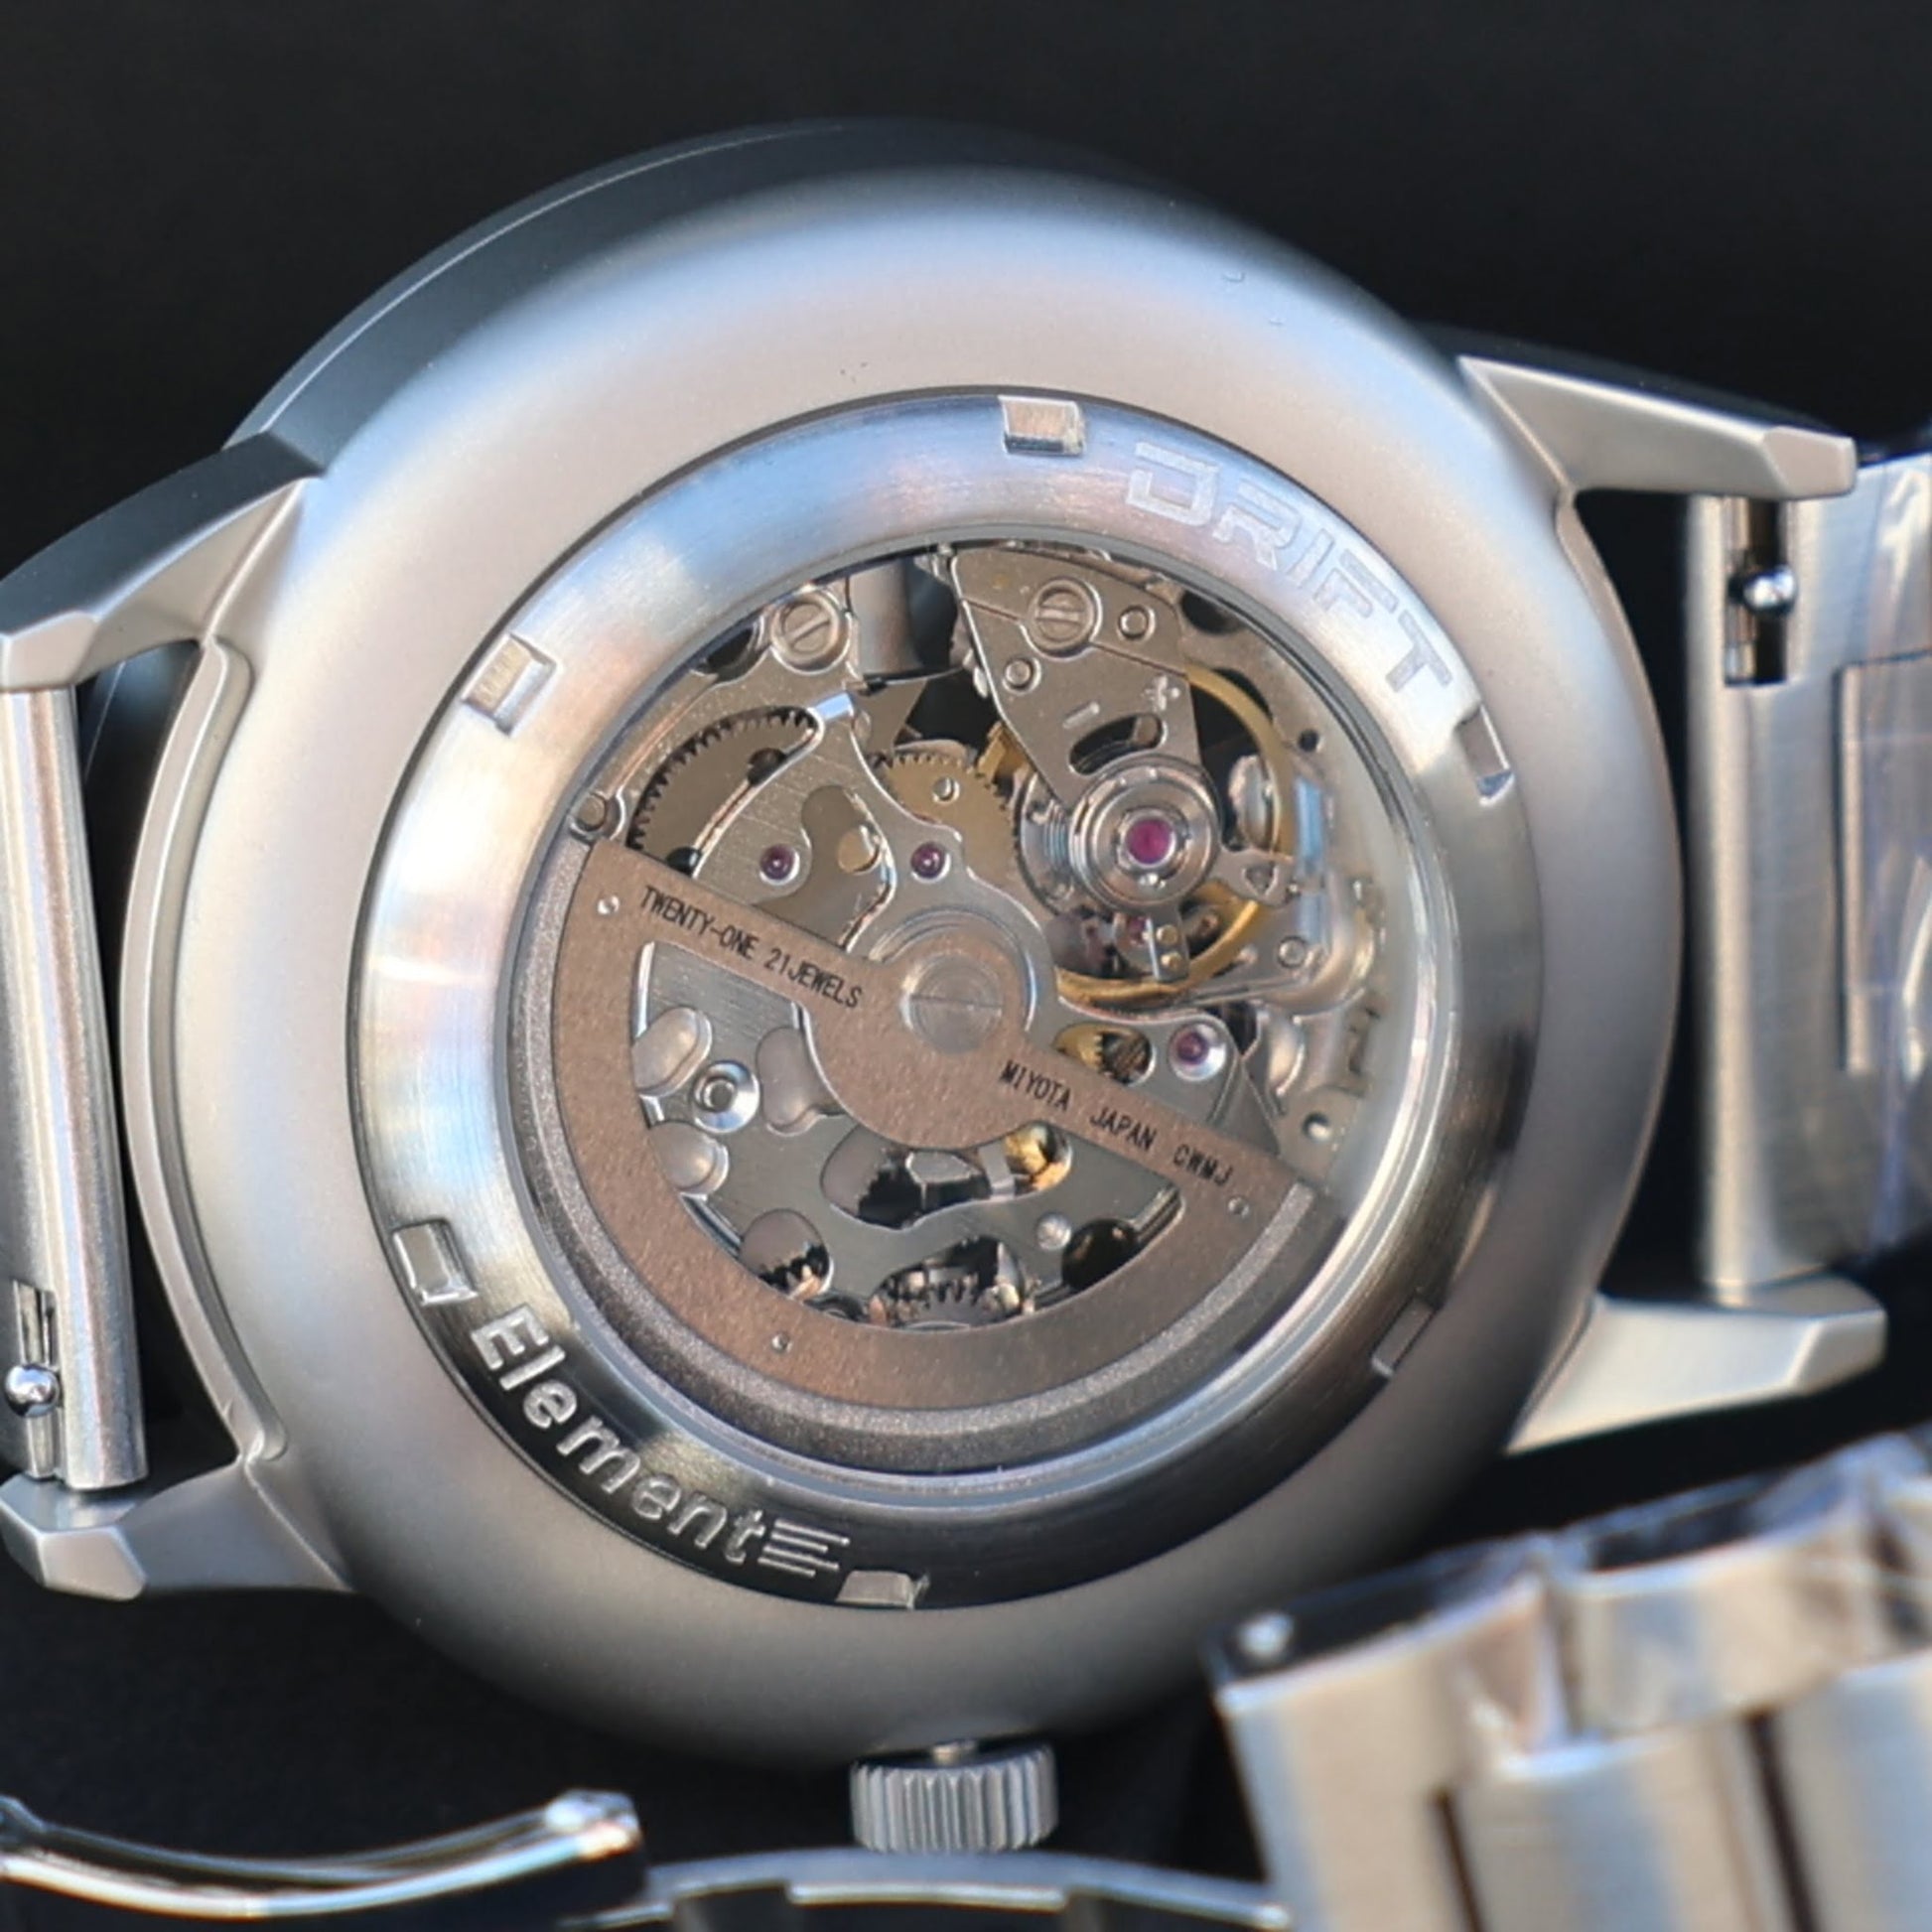 The back view of a DriftElement PGT Essen Motorshow rim watch, displaying the intricate mechanical movement and craftsmanship. 'DRIFT Element' is etched around the transparent case back, showcasing the watch's engineering that includes 'TWENTY-ONE JEWELS' and precision components. This highlights the young German startup's dedication to innovative design and quality watchmaking.